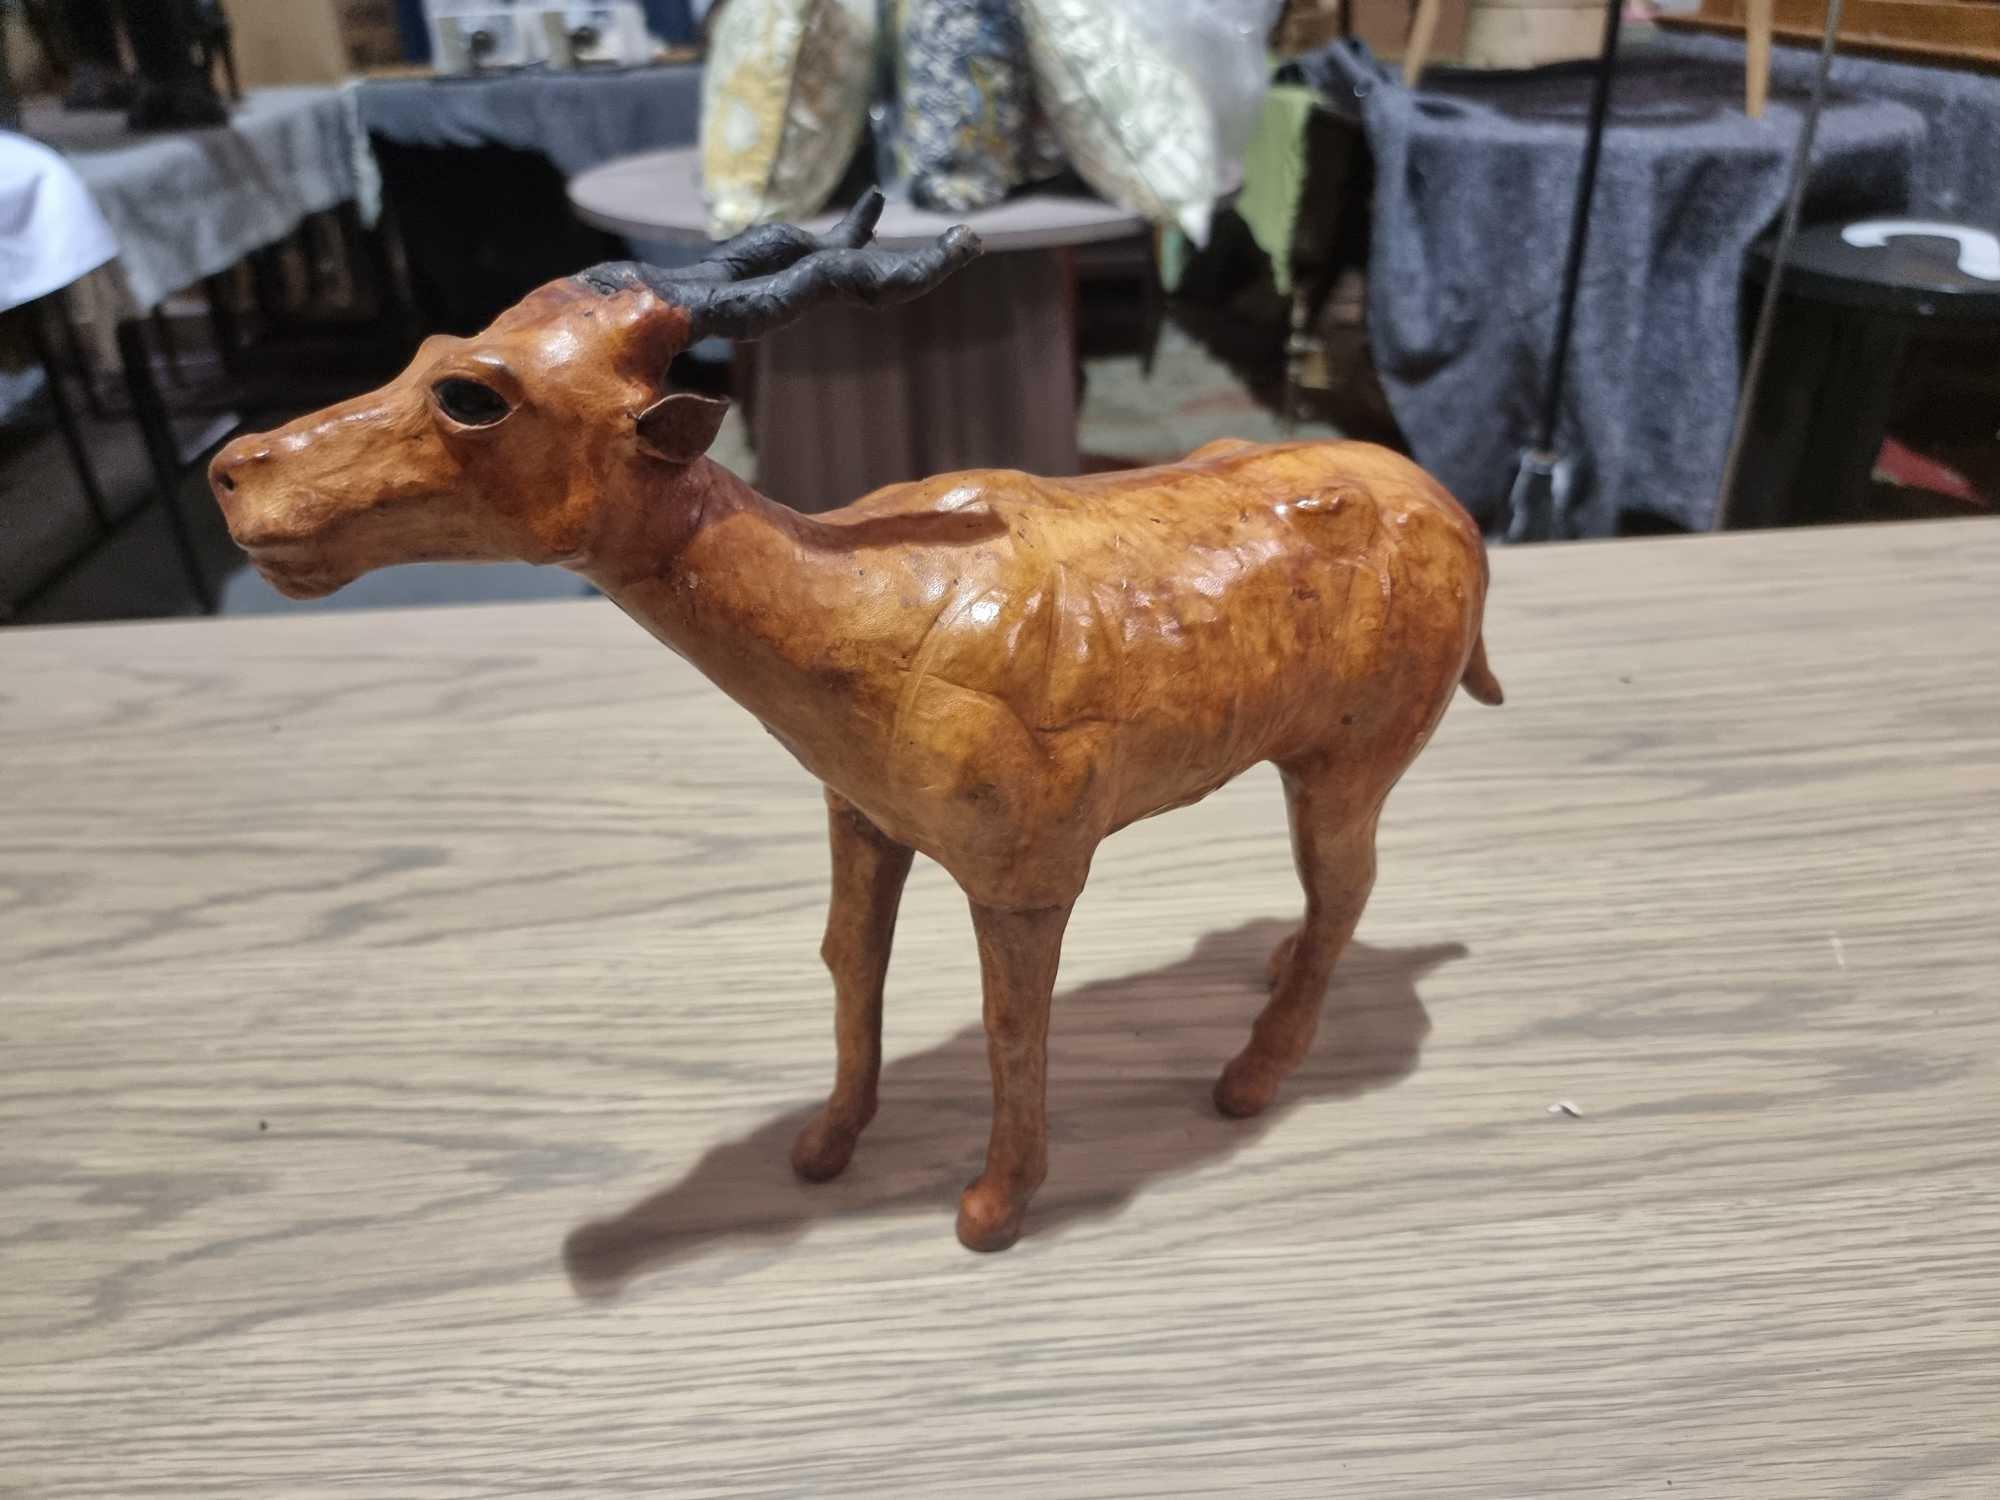 Leather Wrapped Antelope With Glass Eyes Antelope Has Glass Eyes And Is Hand Made With A Layer Of - Image 2 of 6